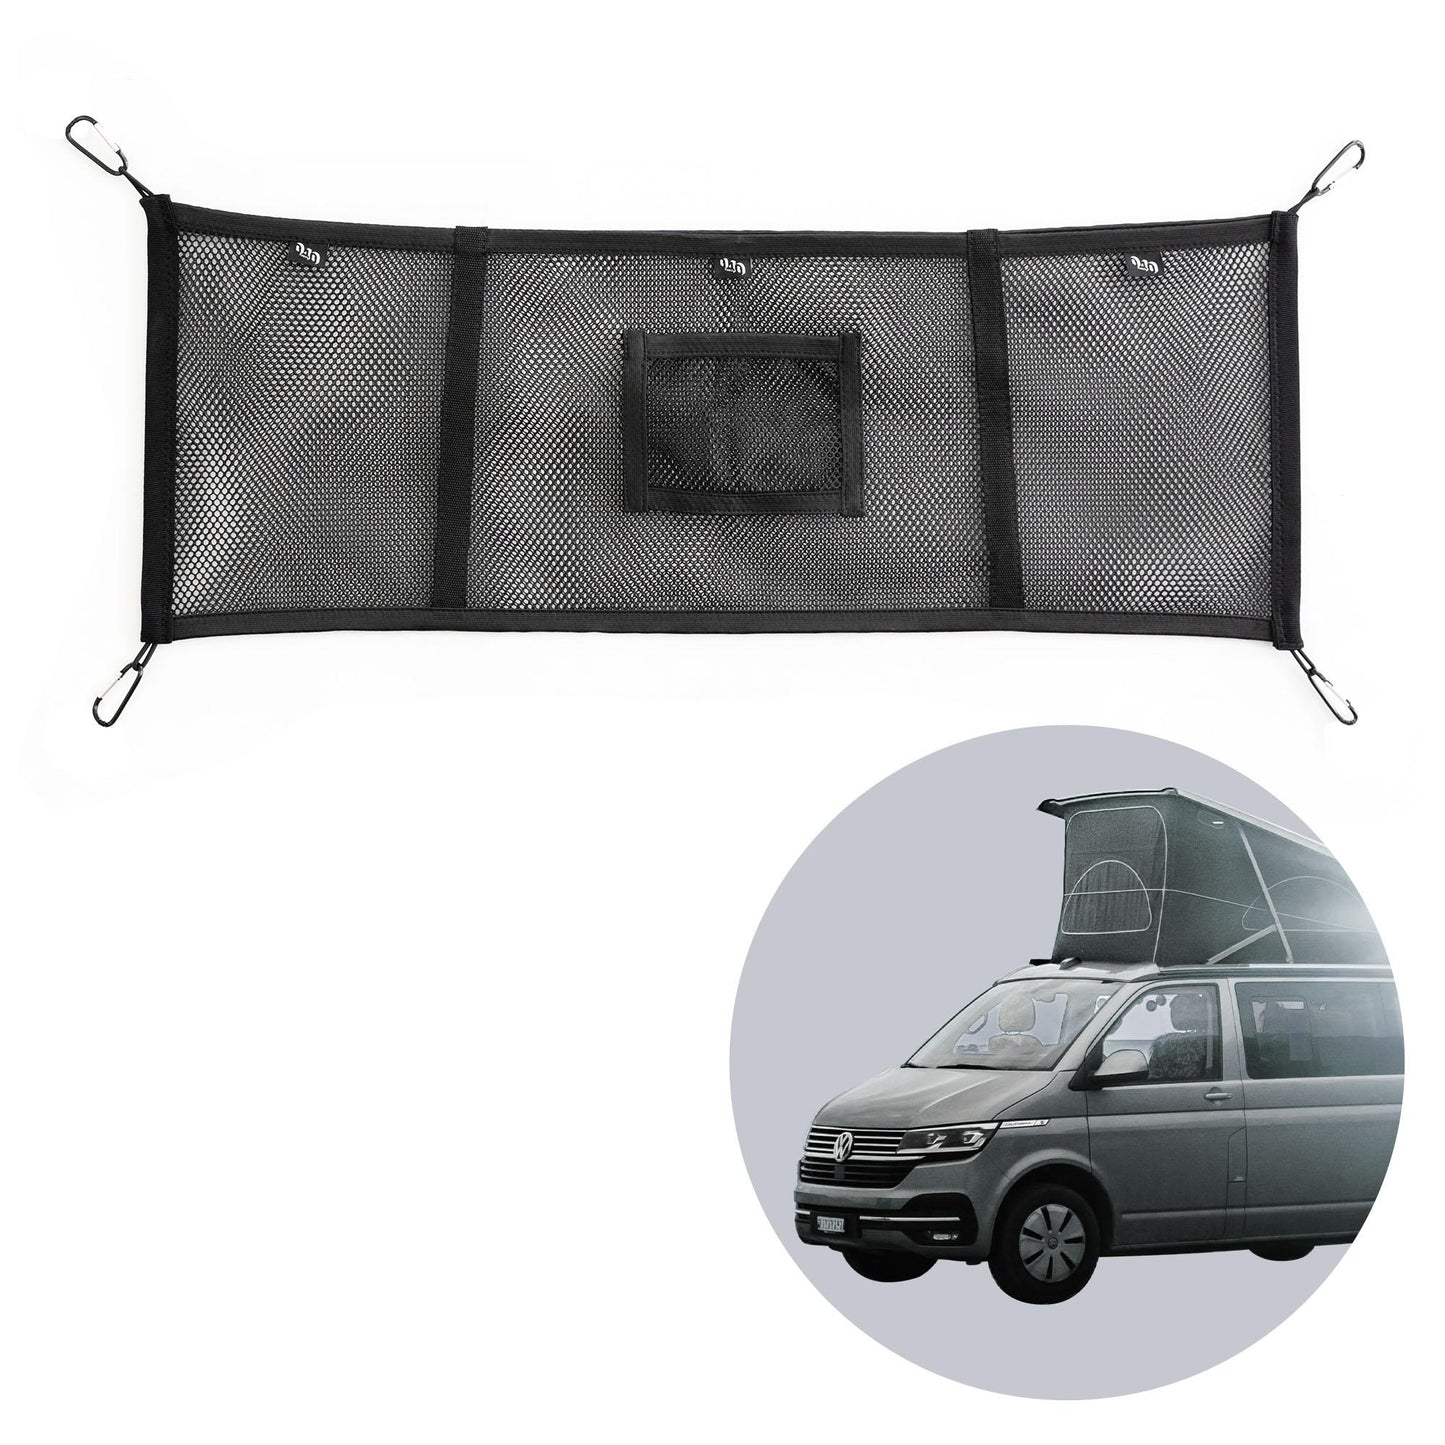 B-stock: Storage network for the installation roof of VW T5 T6 Bulli, Multivan